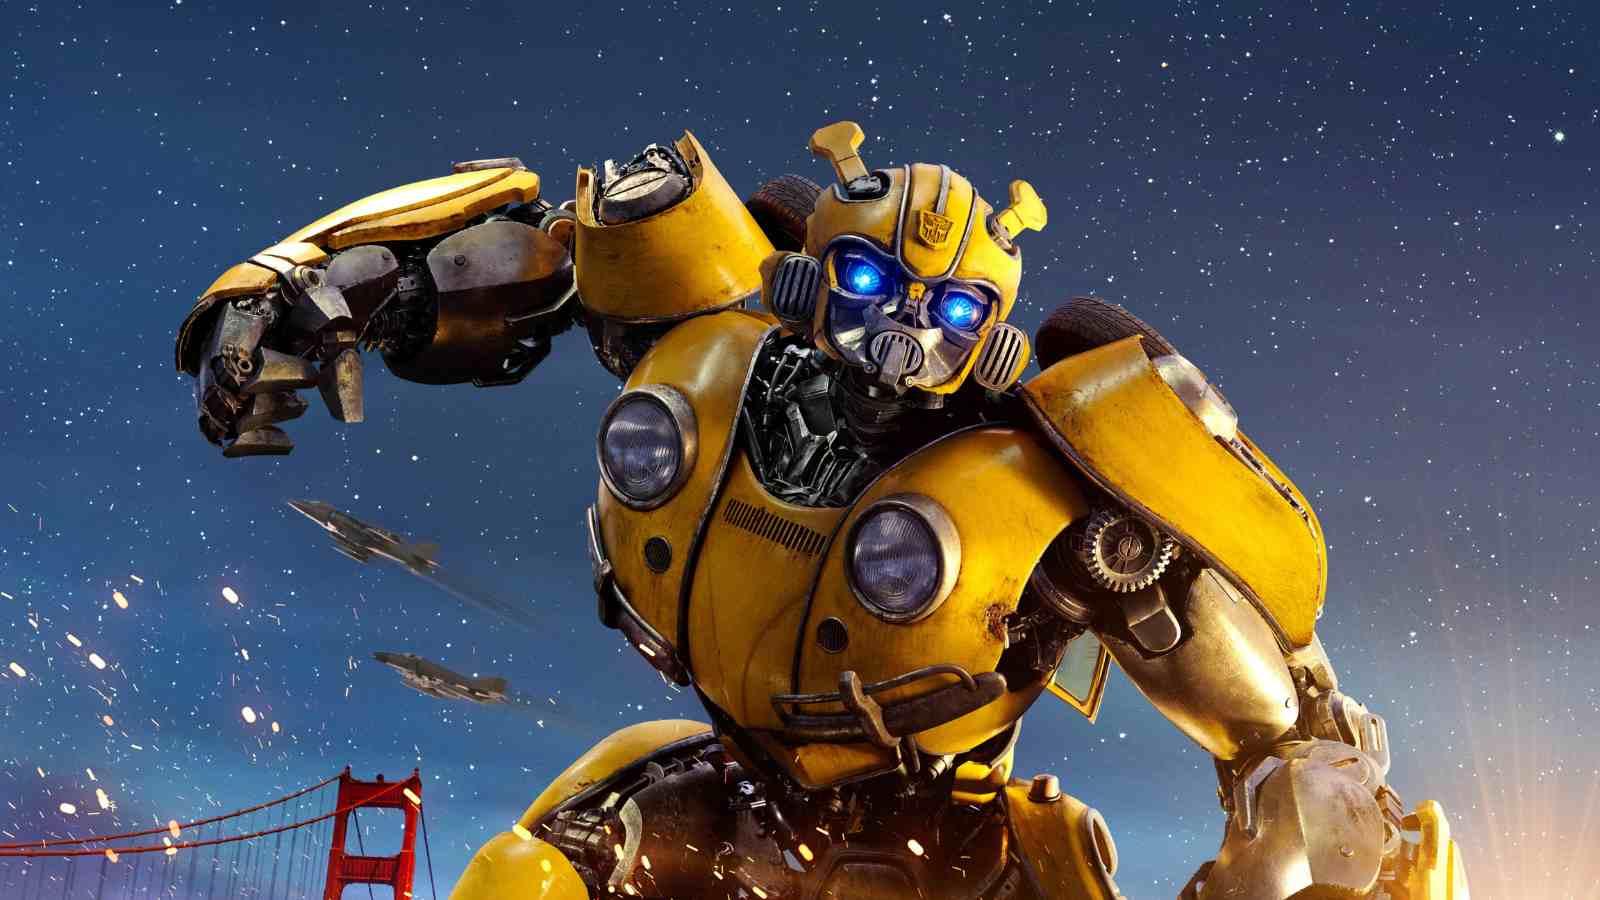 Bumblebee from Transformers